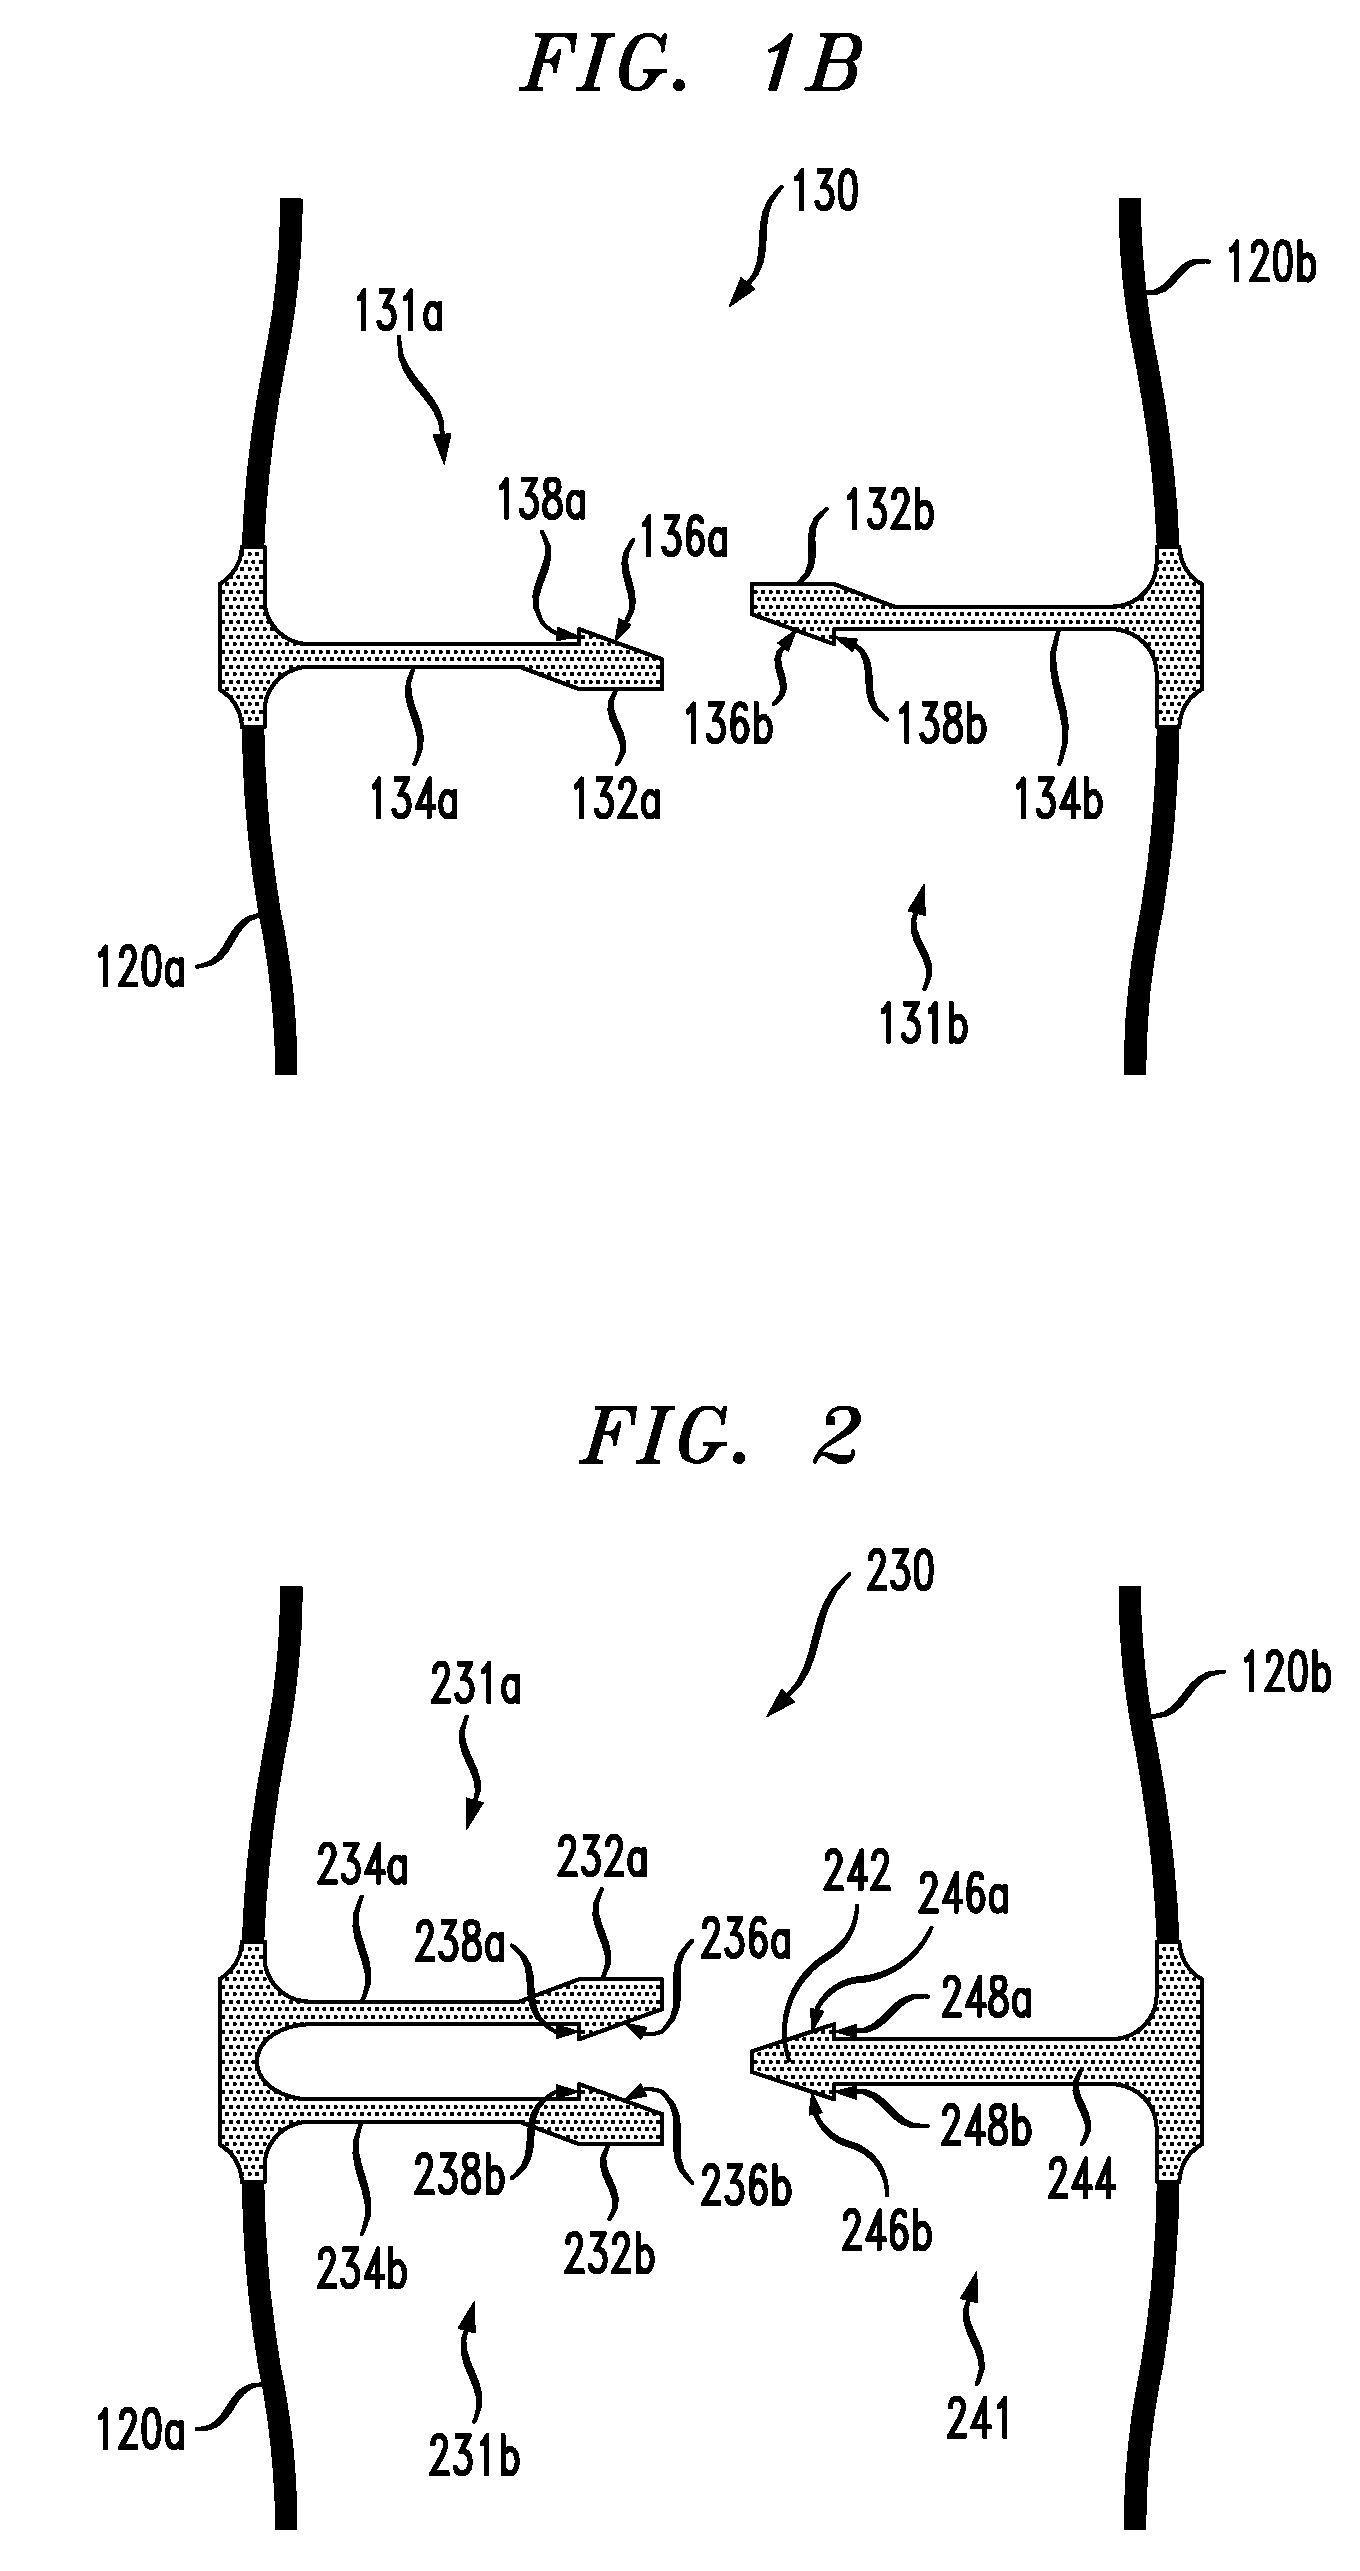 Safety and arming device for high-G munitions